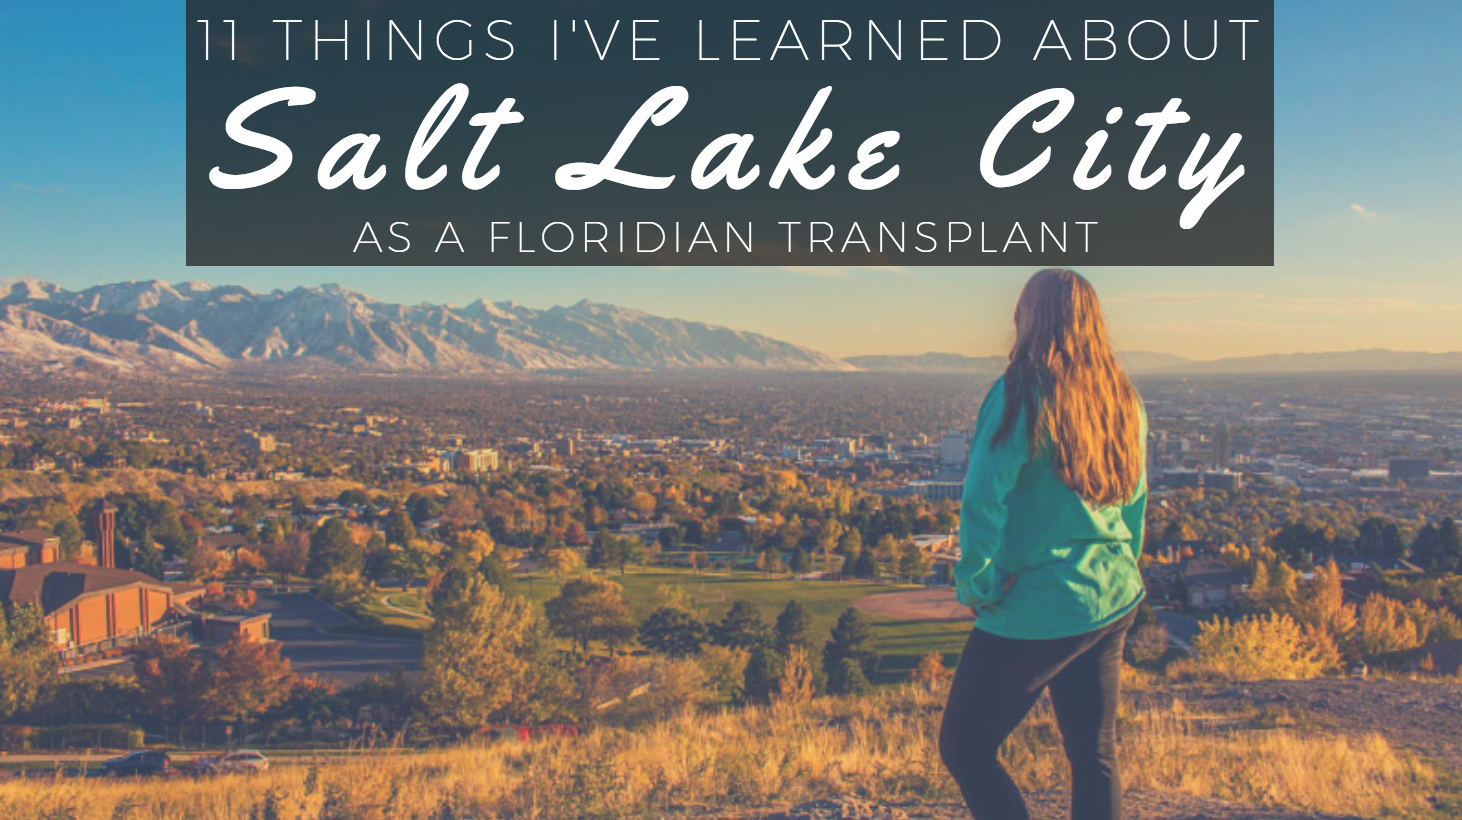 11 Things I’ve Learned About Salt Lake City